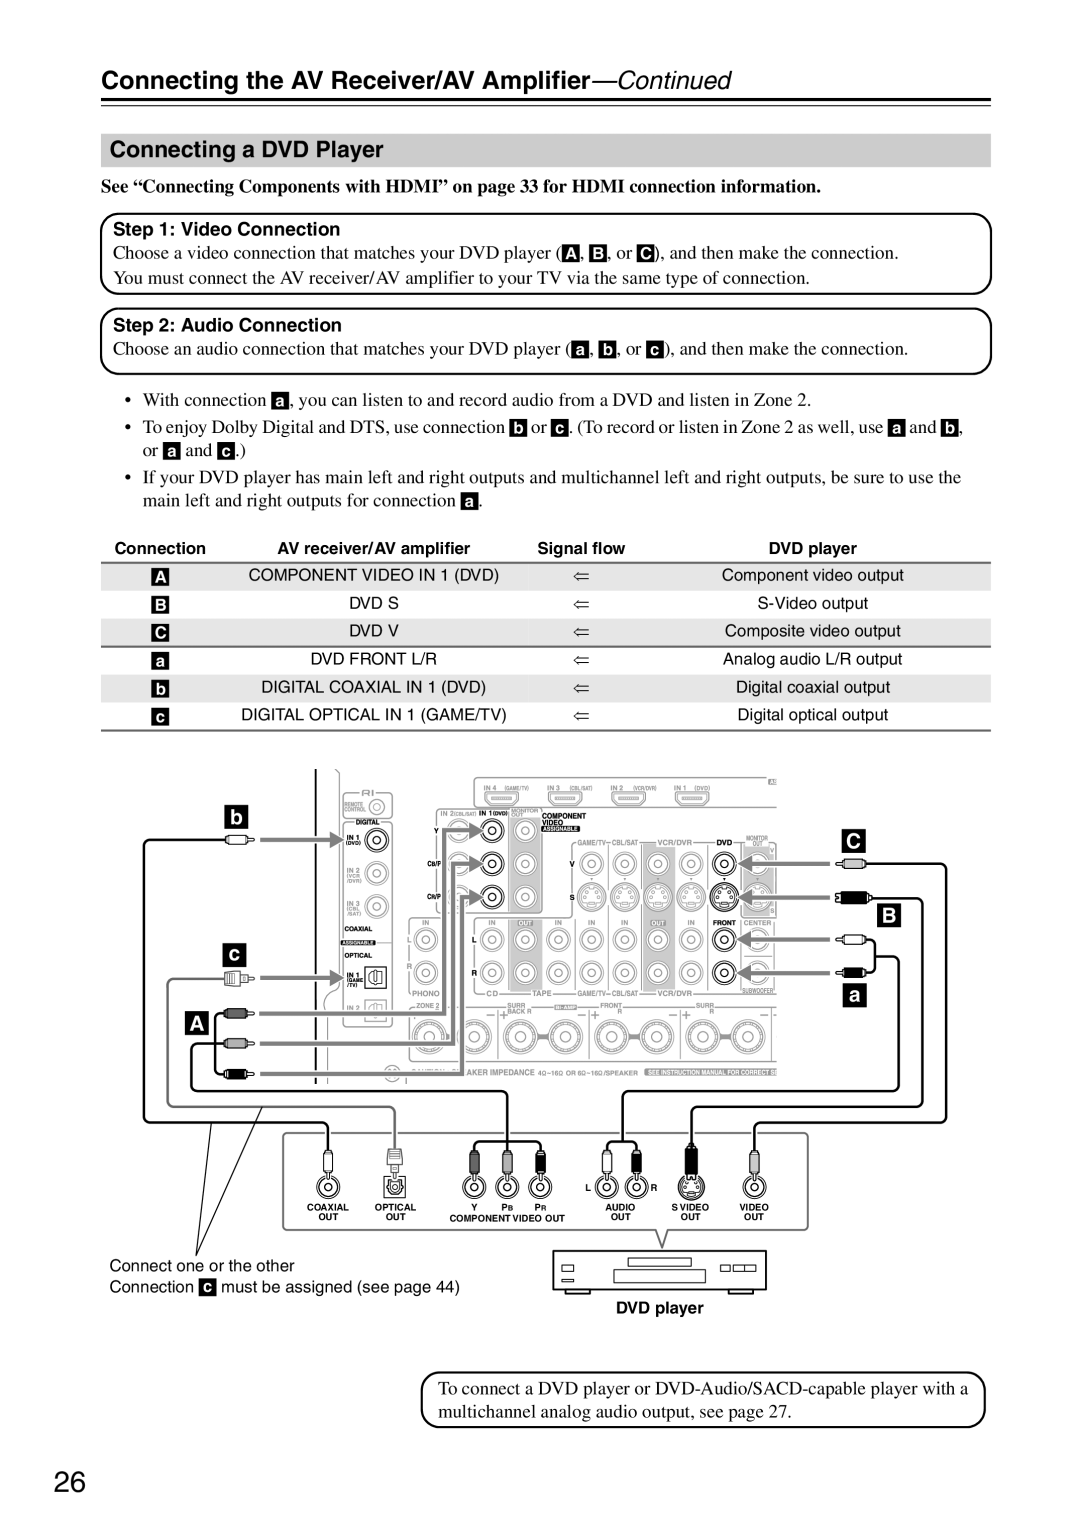 Onkyo TX-SA706 instruction manual Connecting a DVD Player, b C B c, Connecting the AV Receiver/AV Amplifier—Continued 